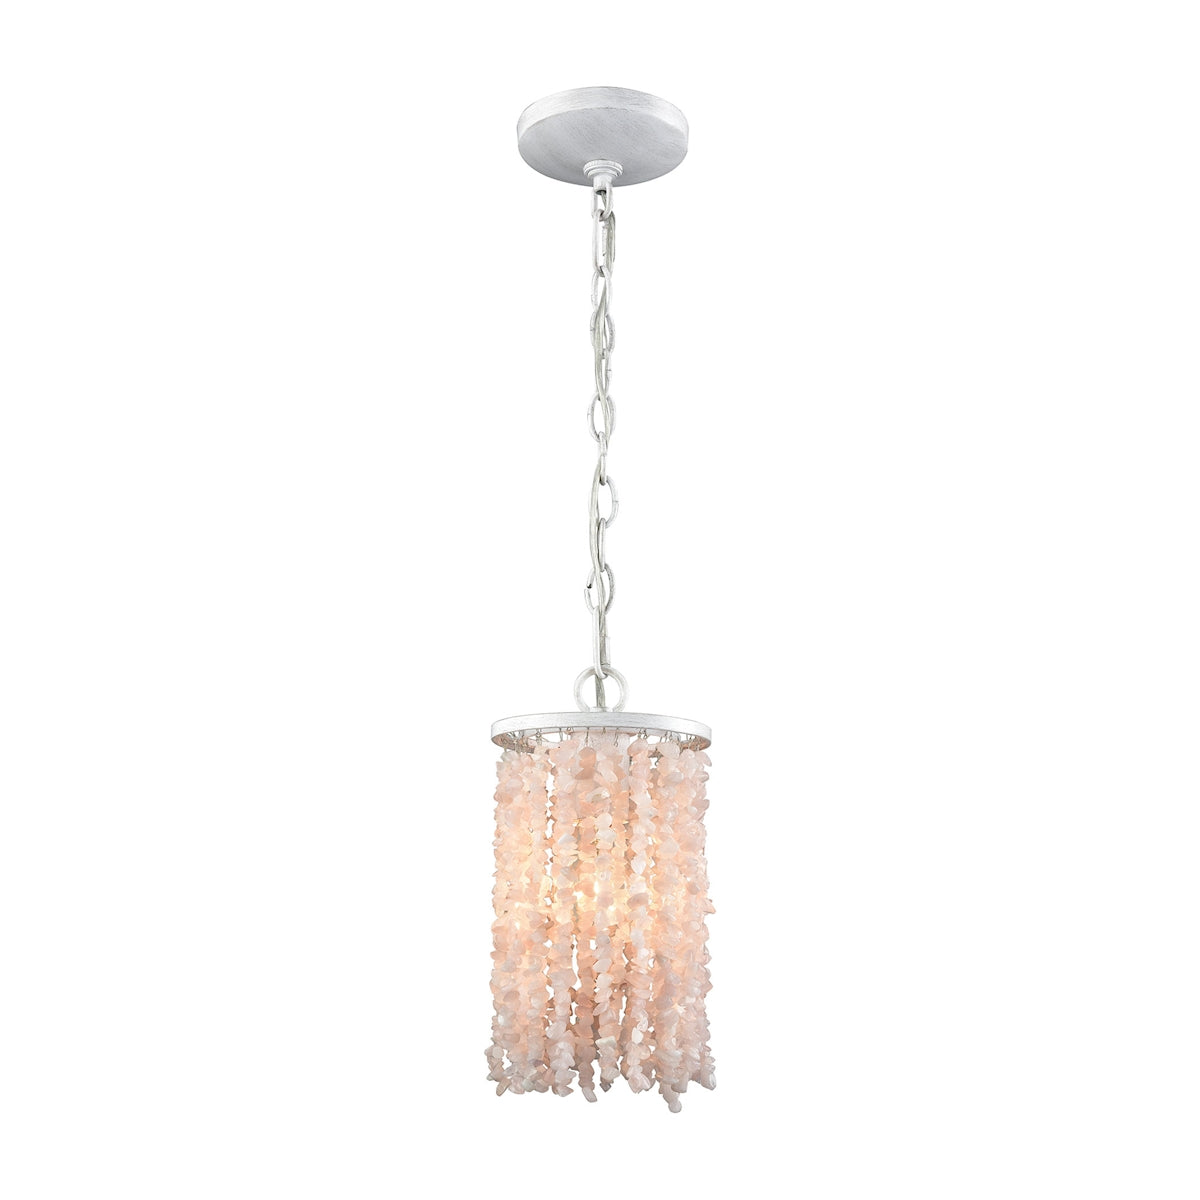 ELK Lighting 65330/1 Agate Stones 1-Light Mini Pendant in Off-white with White/Pink Agate Stones